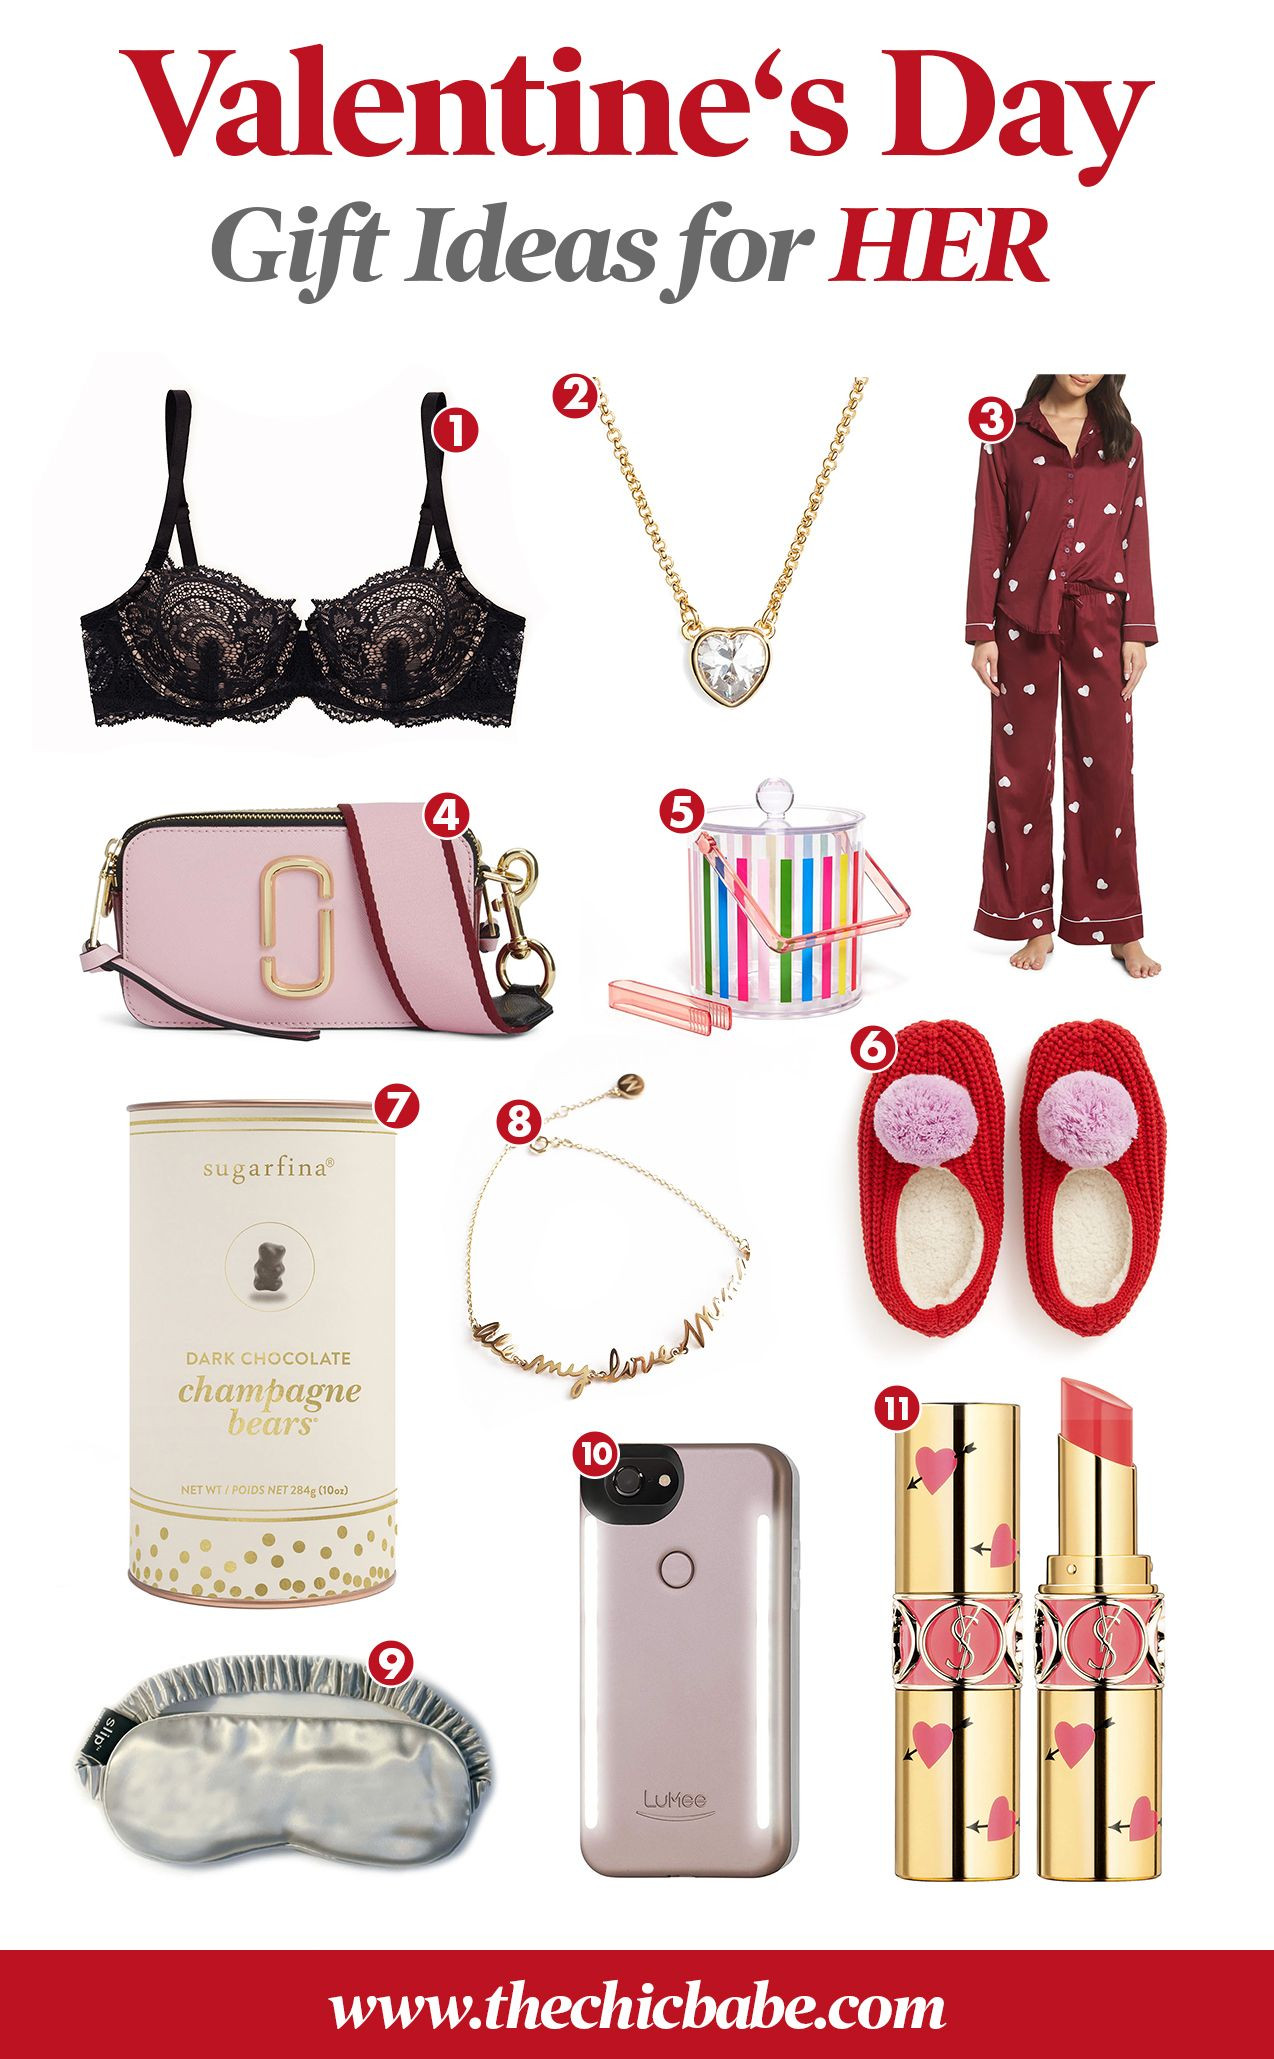 Unique Valentines Gift Ideas For Her
 Valentine s Day Gift Ideas for Her